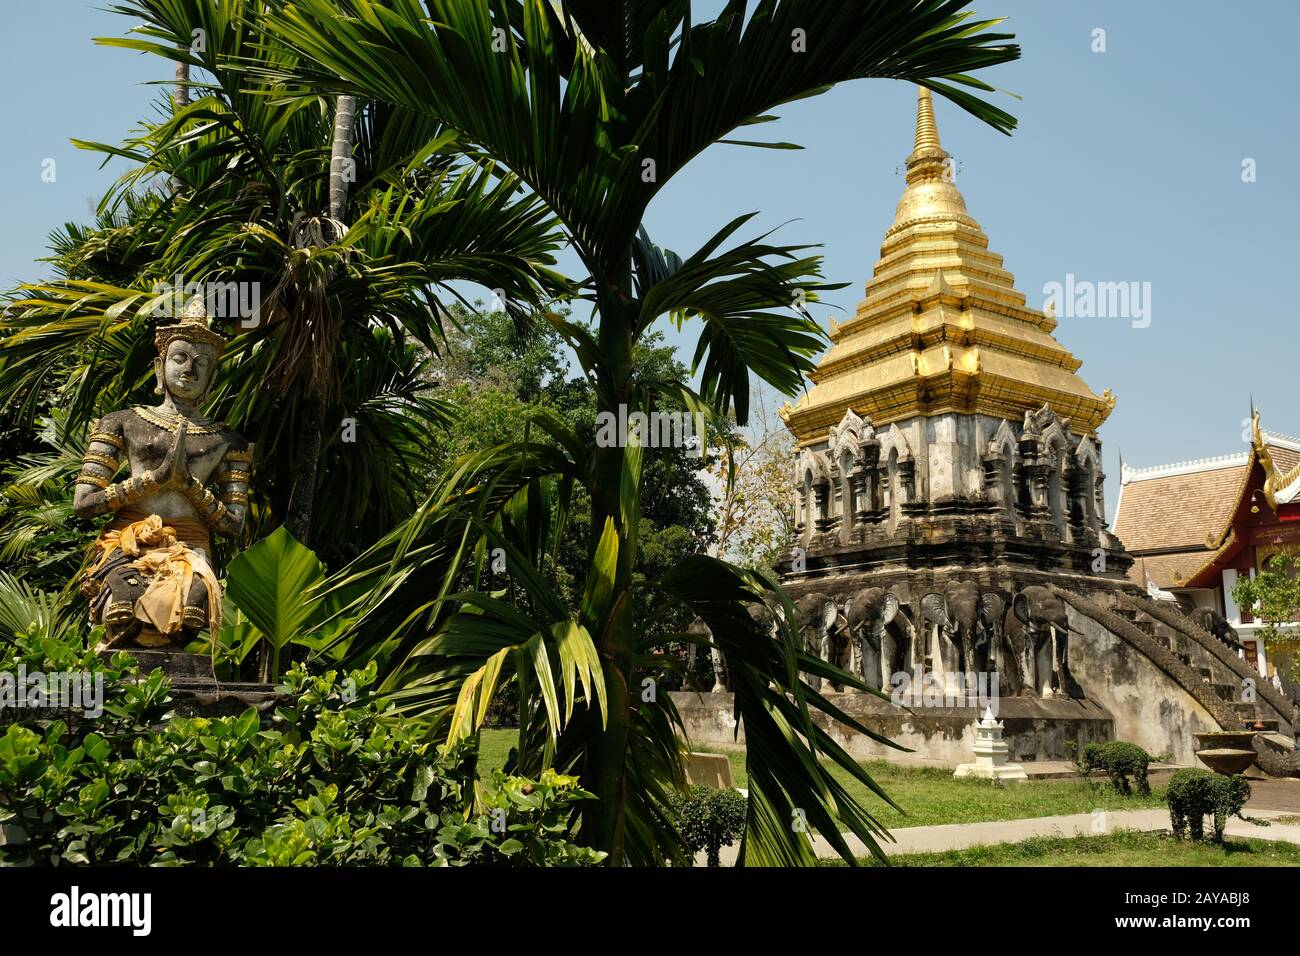 Chiang Mai Thailand - Temple area Chiang Man Buddha and elephant statues Stock Photo